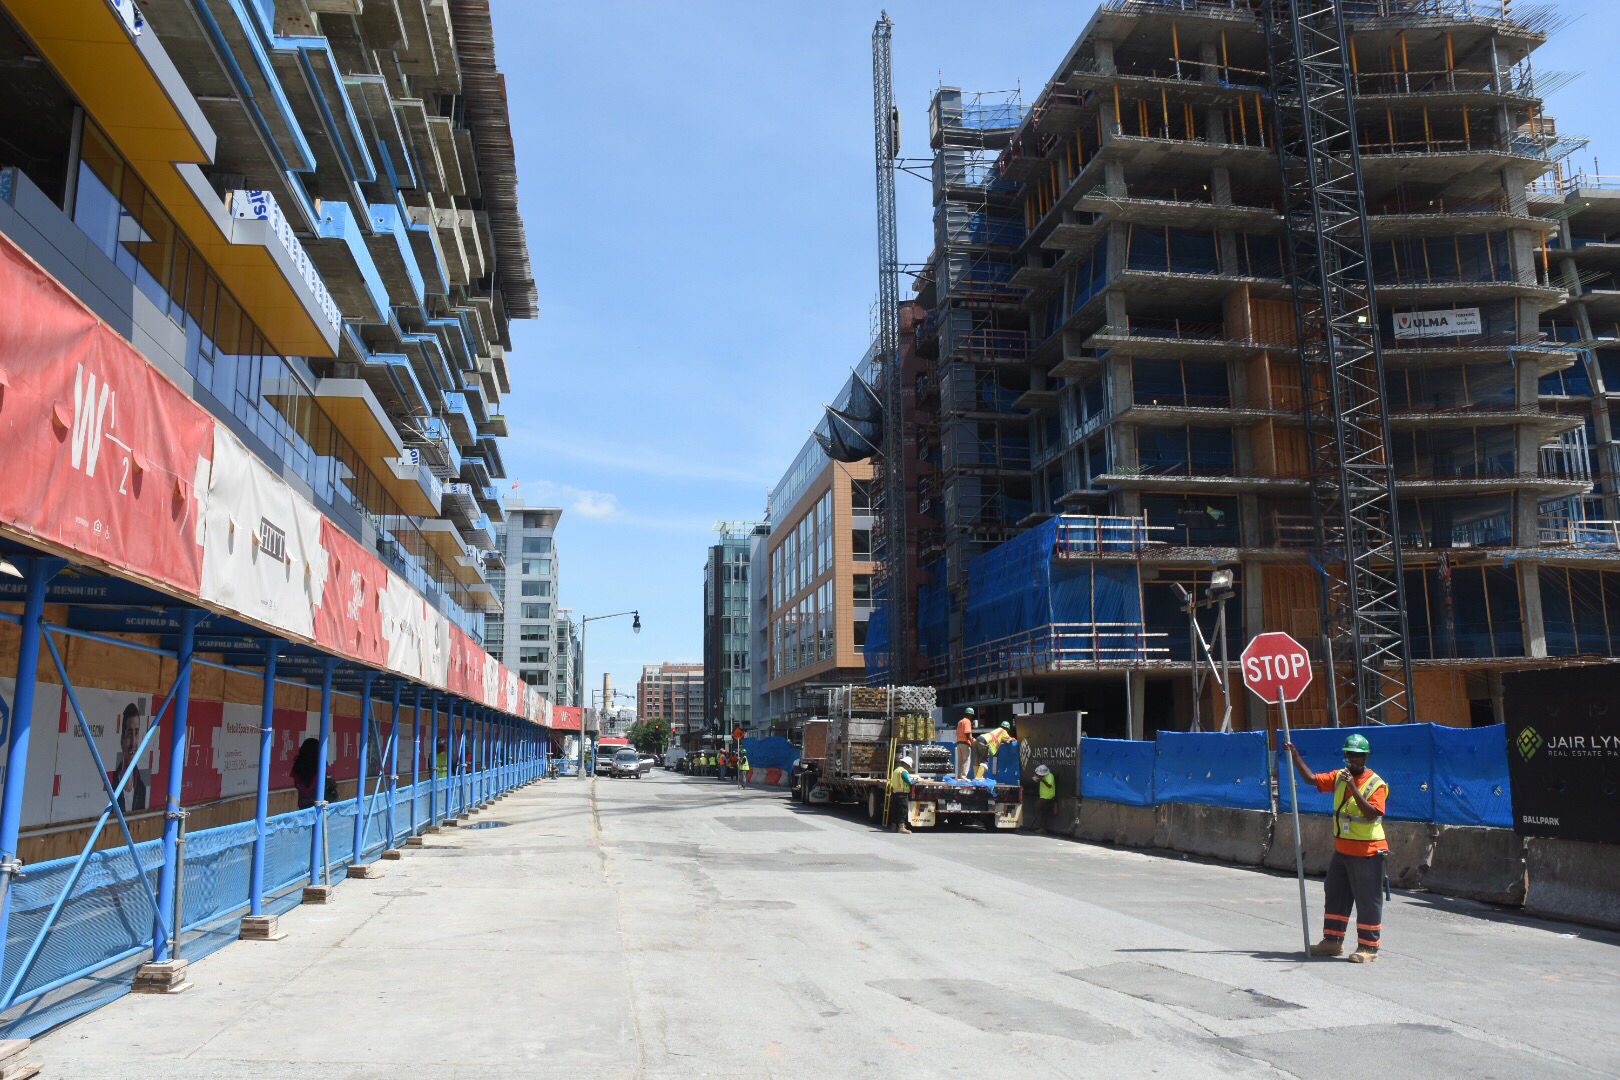 In front of Center Field Gate, the two mixed use buildings under construction will eventually have nearly 1,000 residential units and thousands of feet of retail space combined. For now, they are a work in progress work along Half Street SE appears only halfway complete. (WTOP/Dave Dildine)